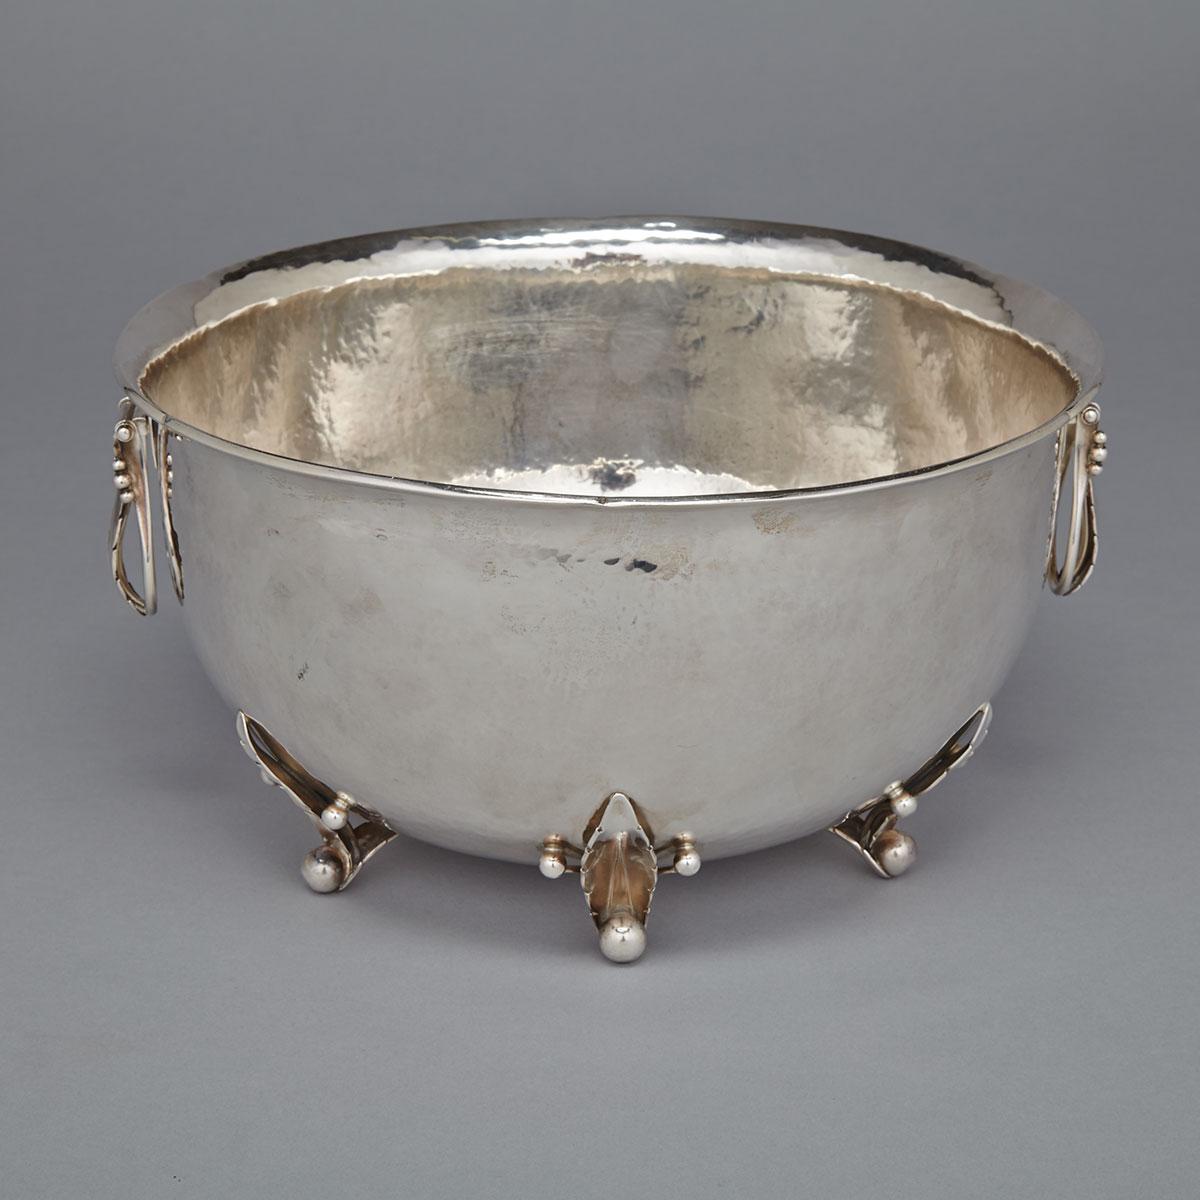 Canadian Silver Punch Bowl, Carl Poul Petersen, Montreal, Que., c.1972